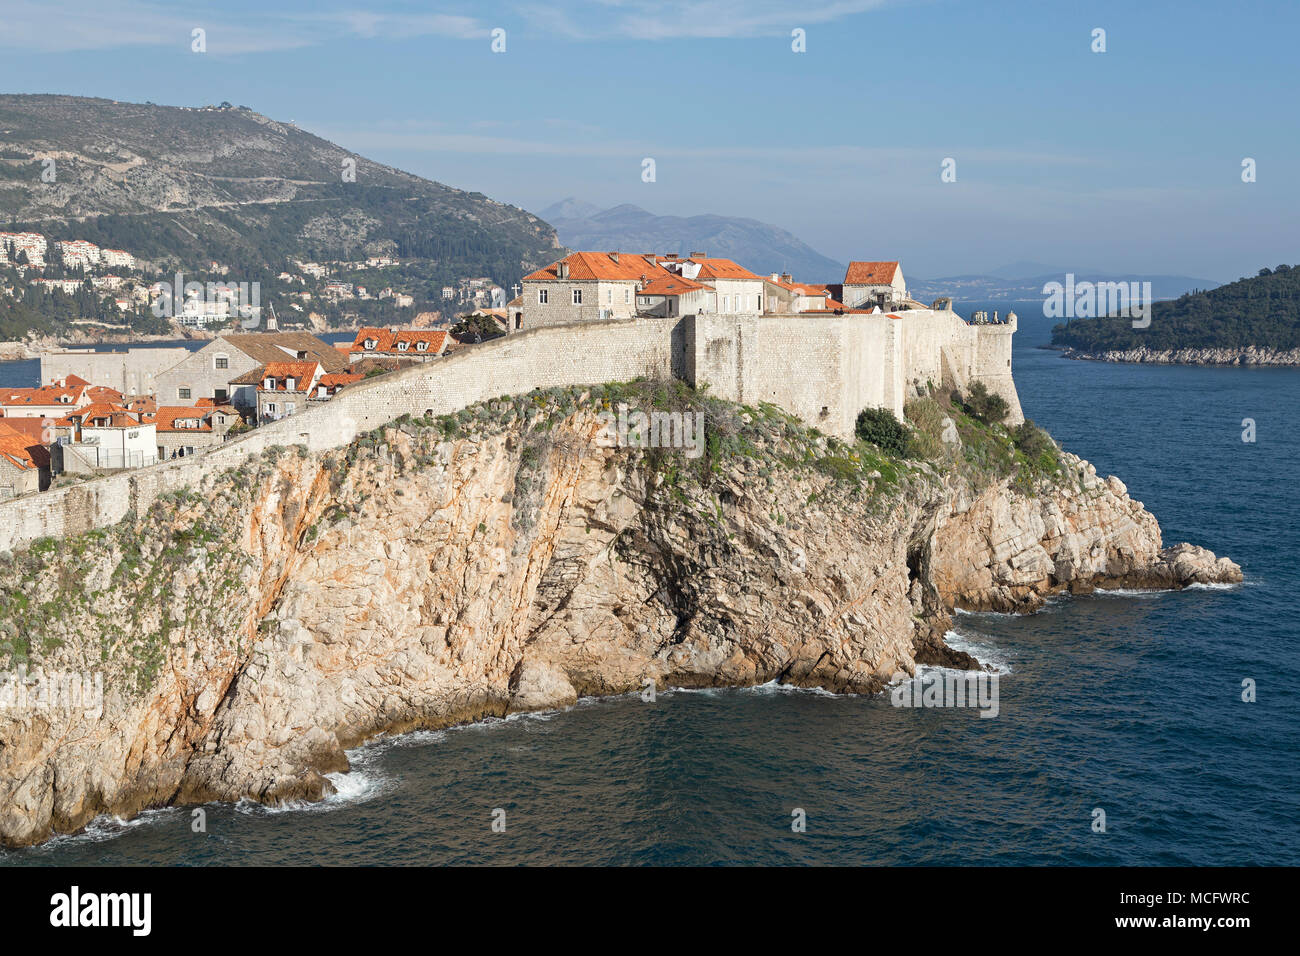 town wall and old town, Dubrovnik, Croatia Stock Photo